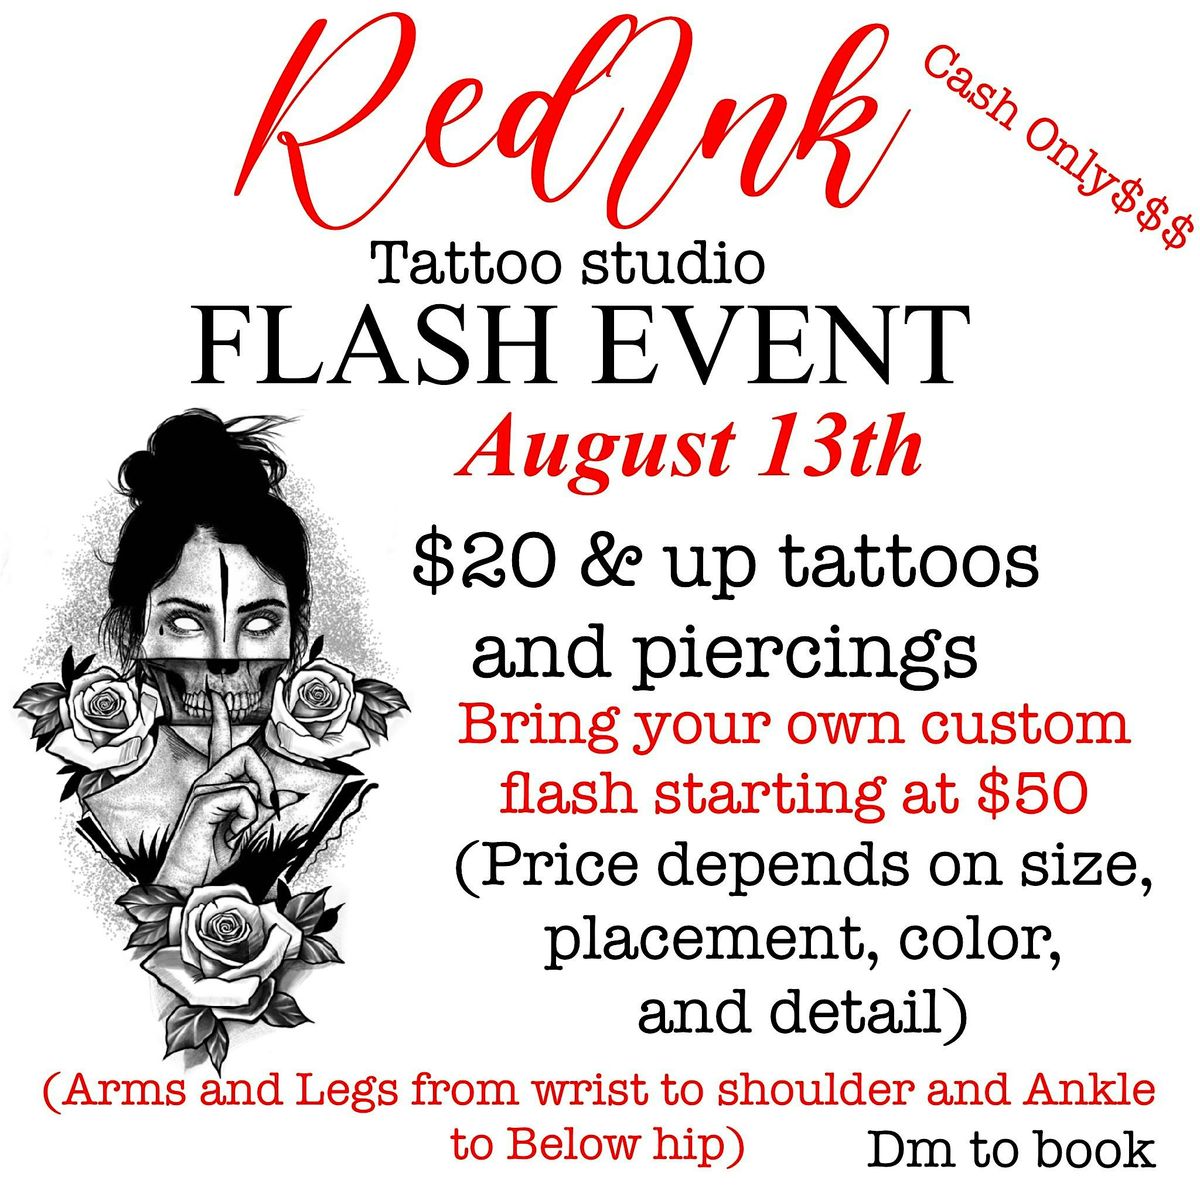 FLASH $20 $35 AND UP TATTOOS AND PIERCINGS AUGUST 13TH